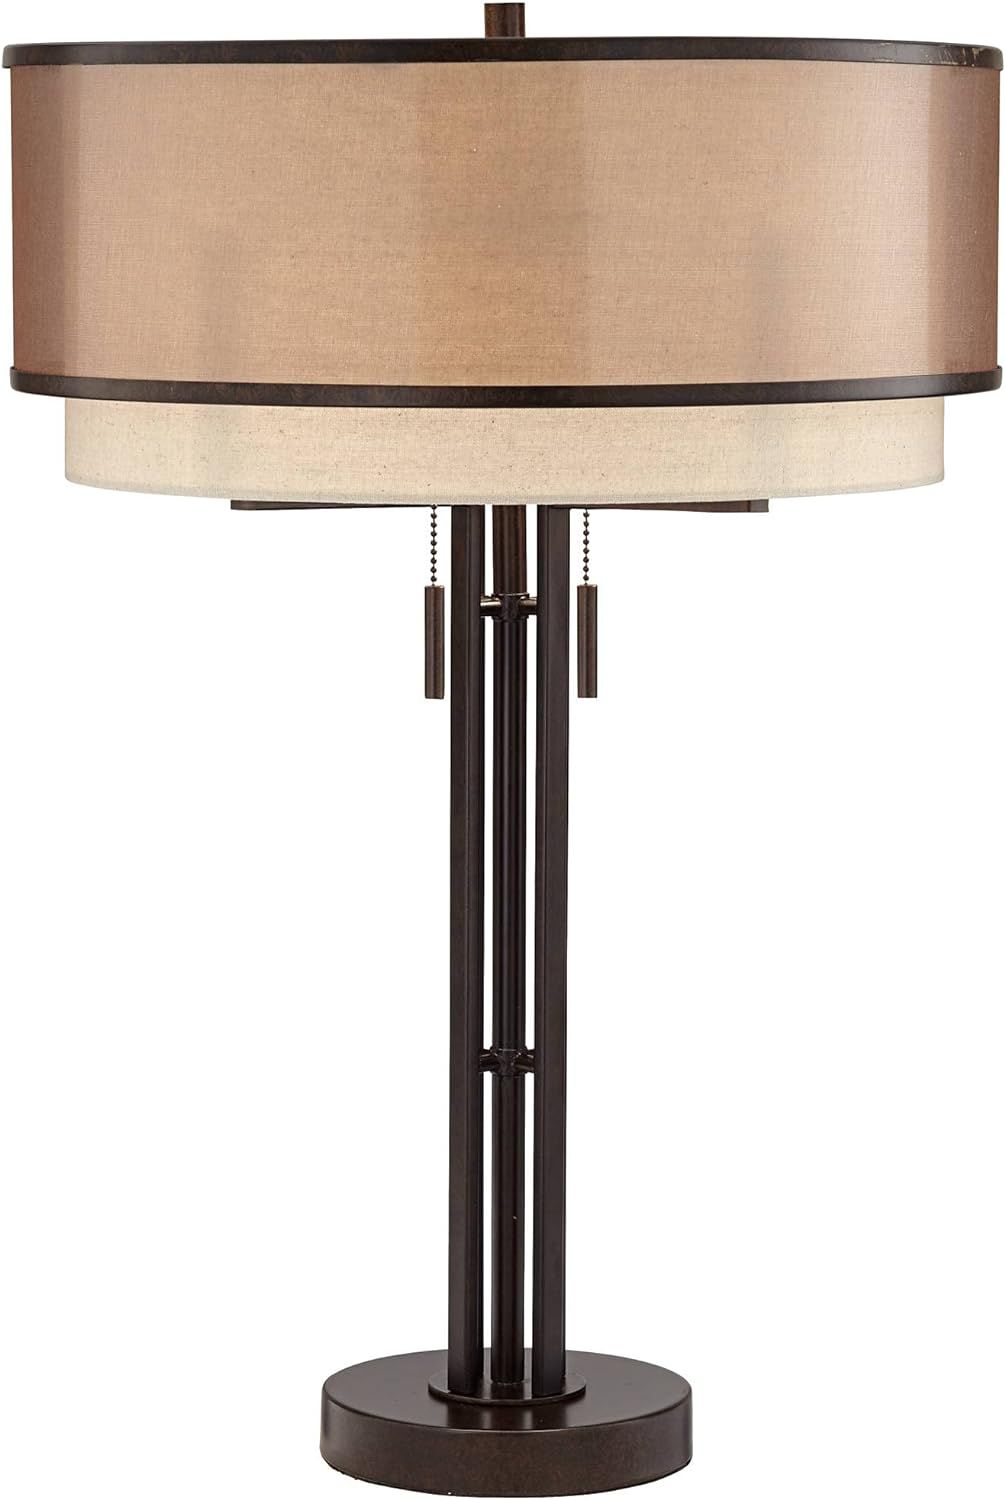 Franklin Iron Works Store Andes Farmhouse Industrial Modern Table Lamp | Amazon (US)